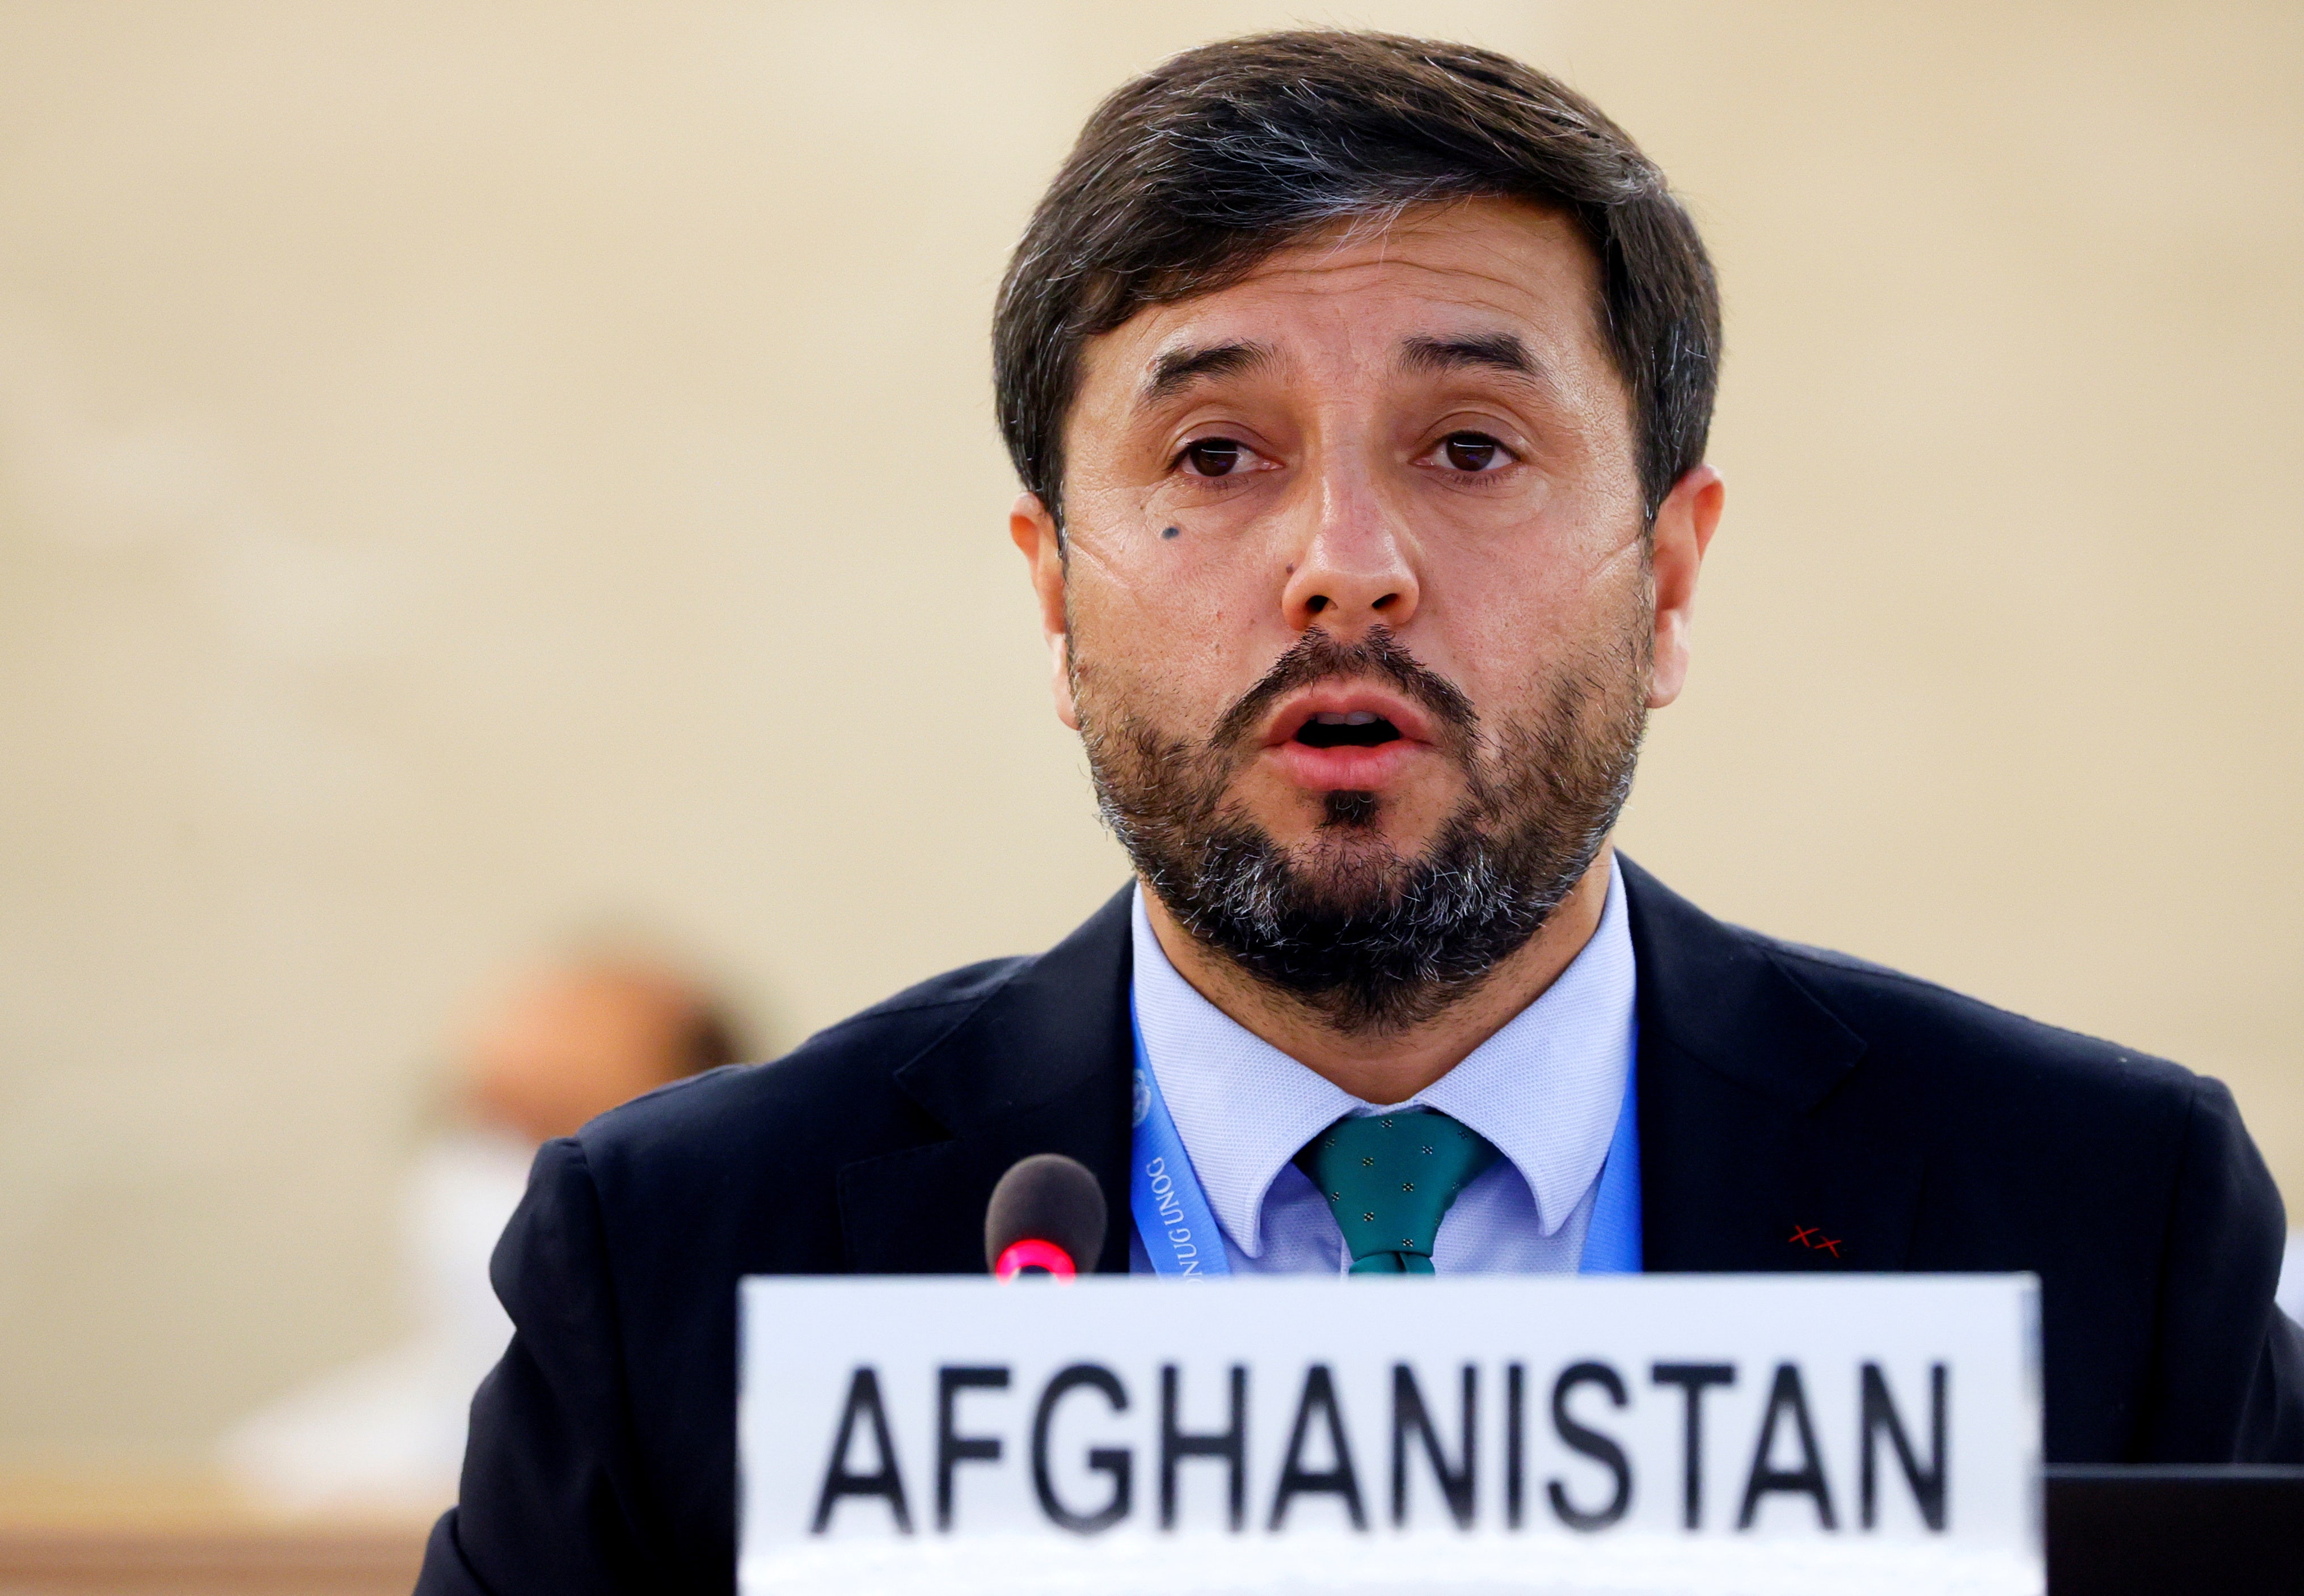 Taliban-controlled Afghanistan intends to seek seat on UN Human Rights Council: report